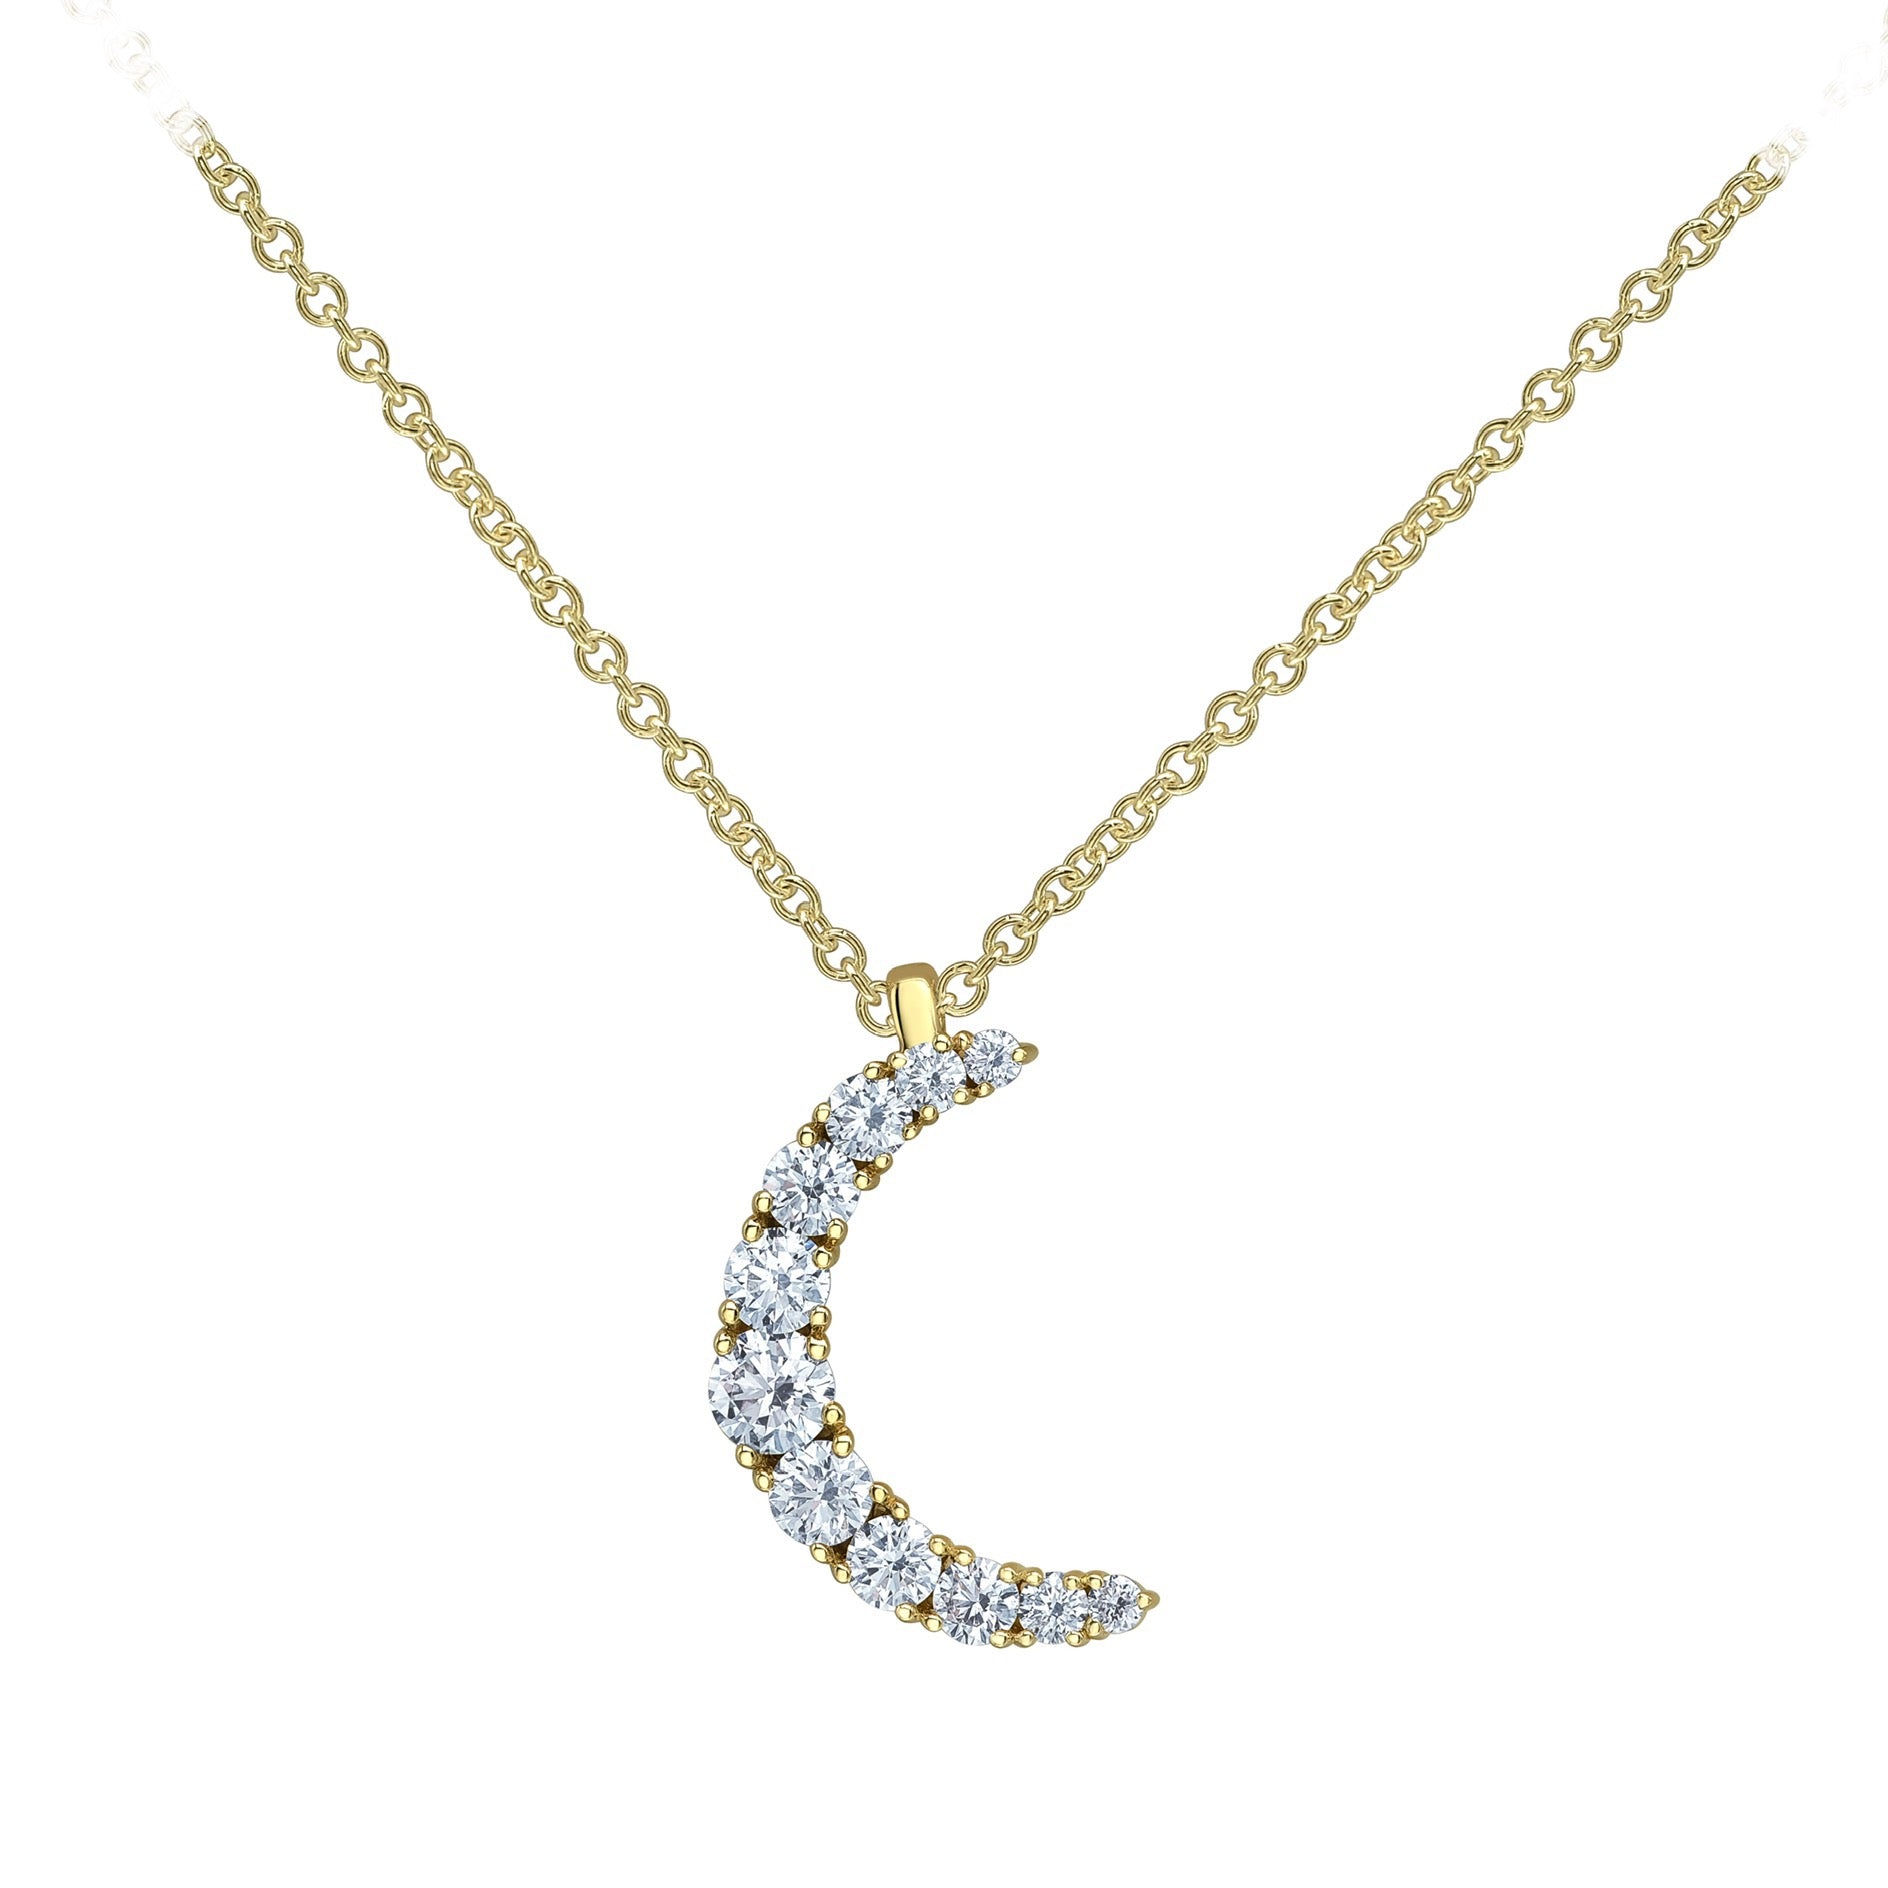 Crafted in 14KT yellow Certified Canadian Gold, this pendant features a crescent moons set with round brilliant-cut Canadian diamonds.